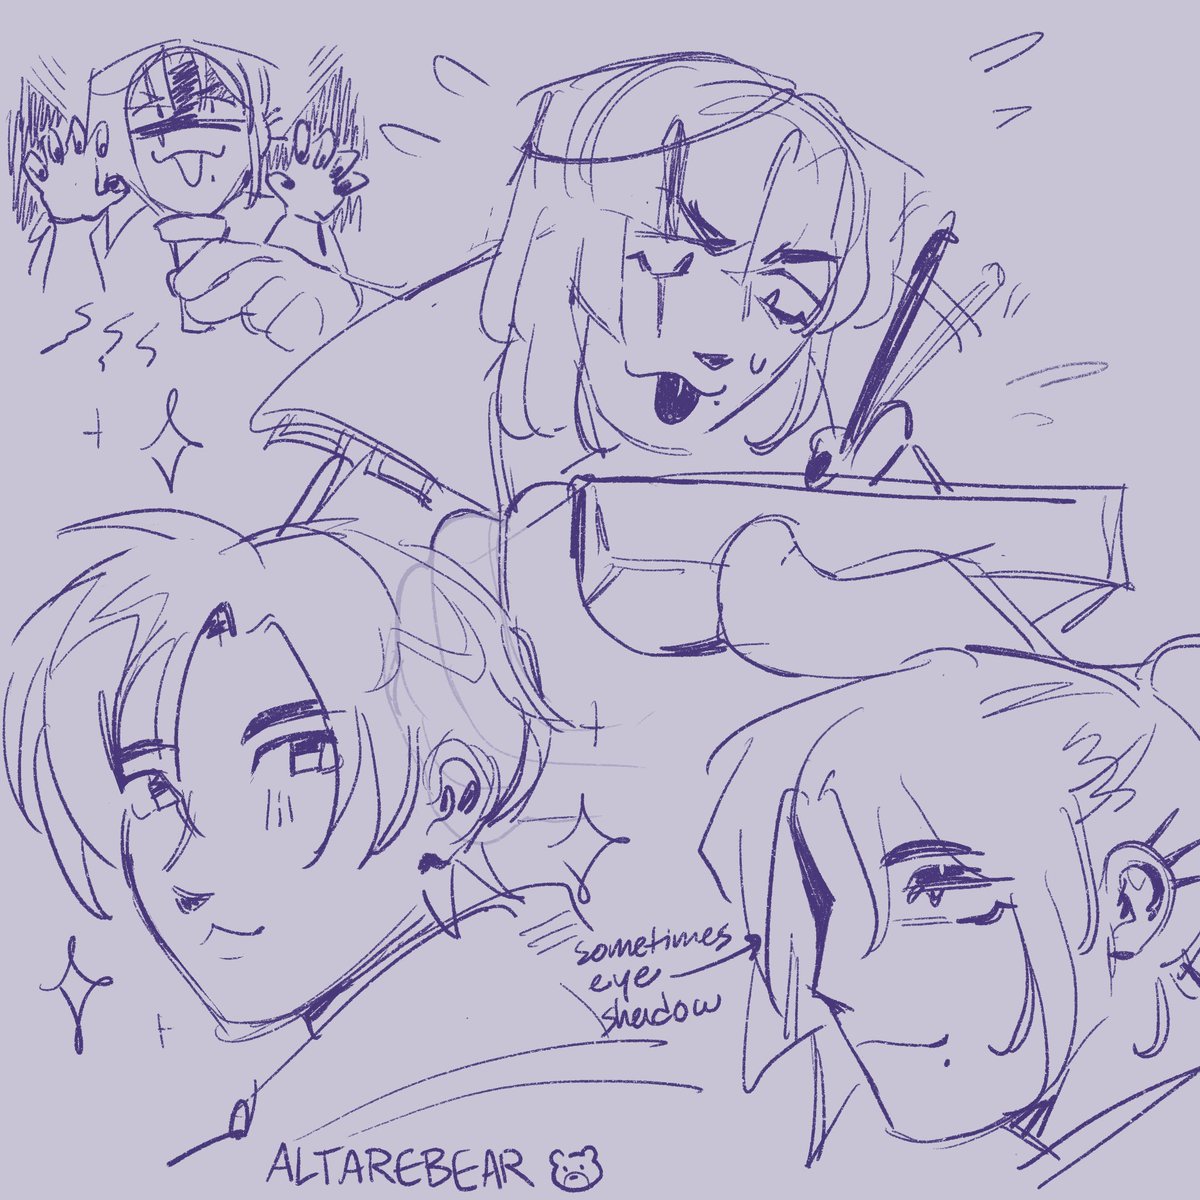 tempus doodles b4 bed. trying to get better at drawing/differentiating everybody.. cozy ☺️